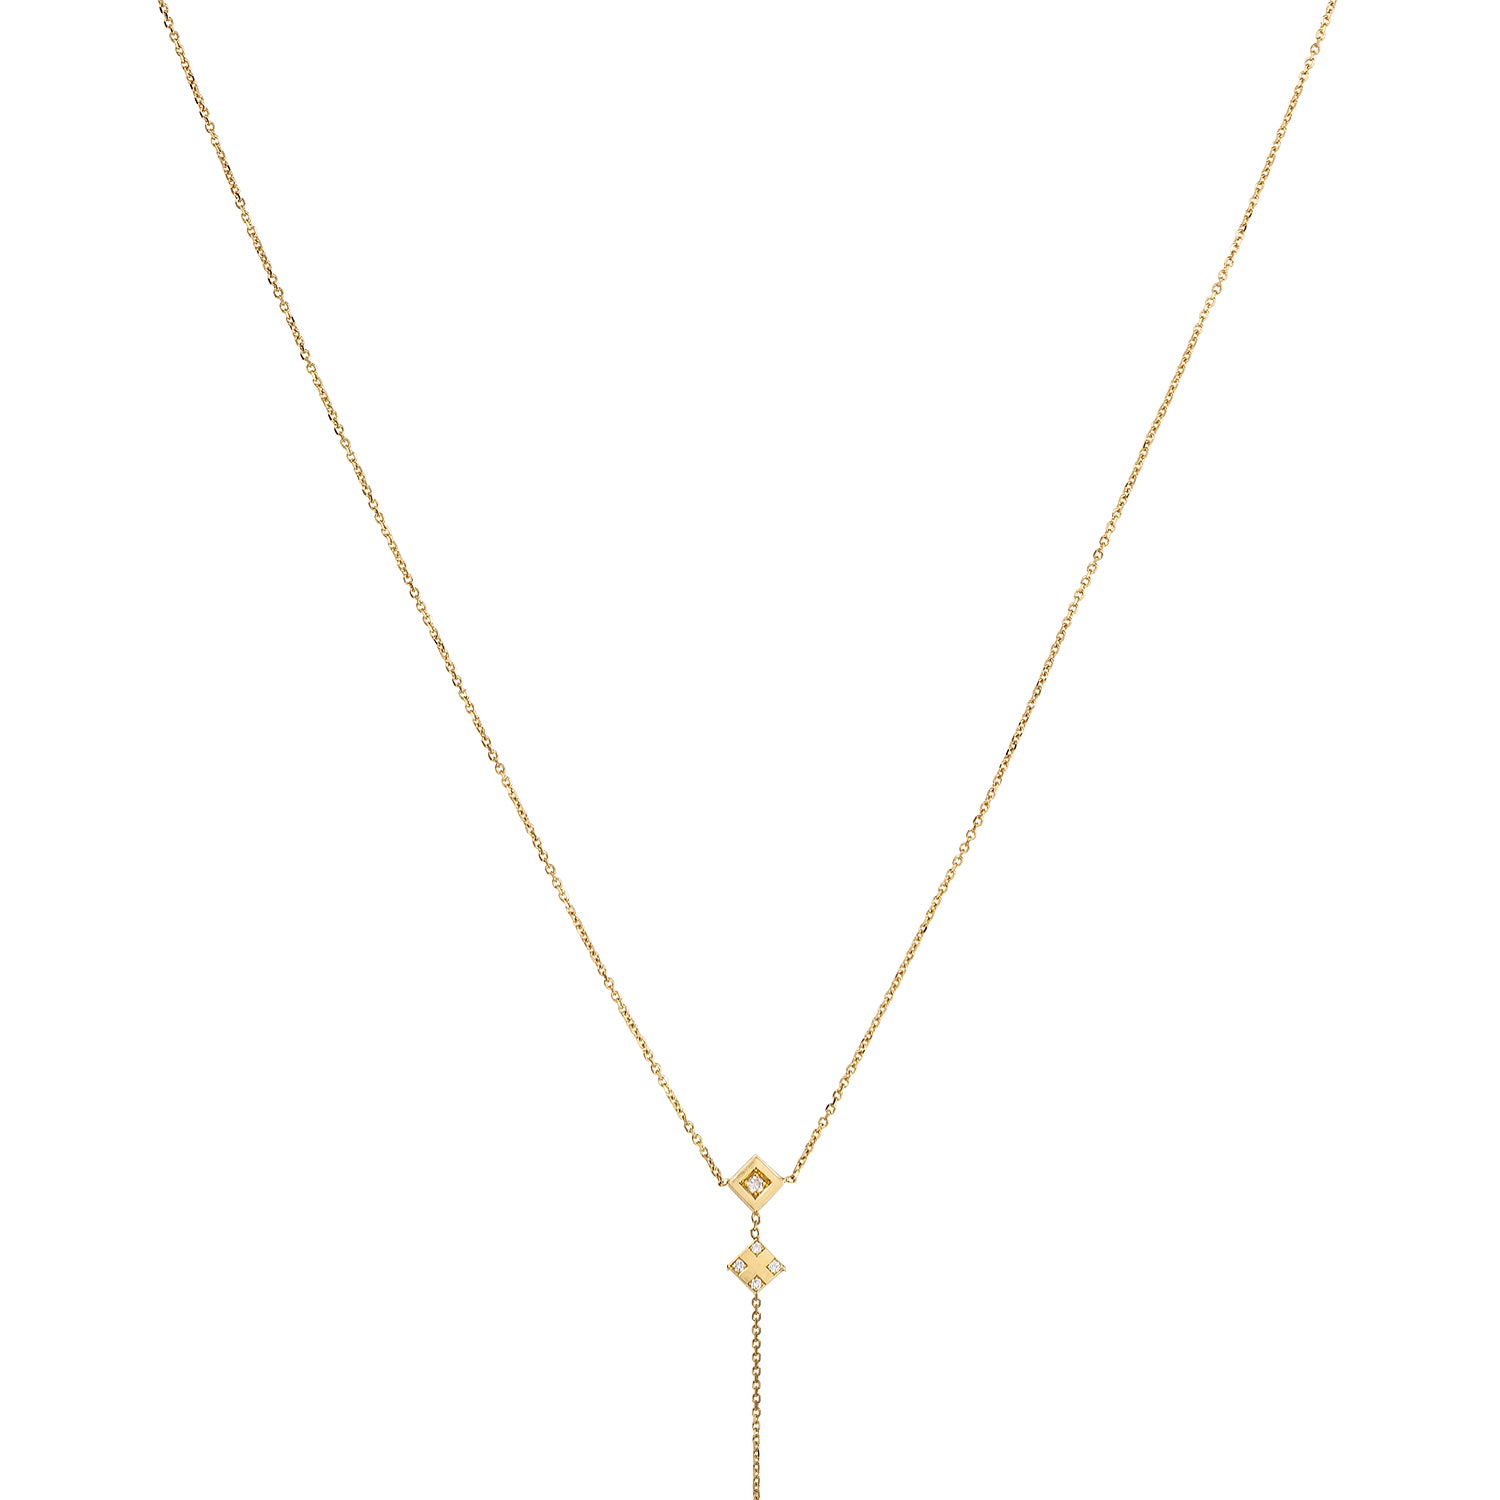 18ct yellow gold necklace with double Diamond pave set squares. The collection was inspired by favourite family games and the serendipitous charm of the dice.